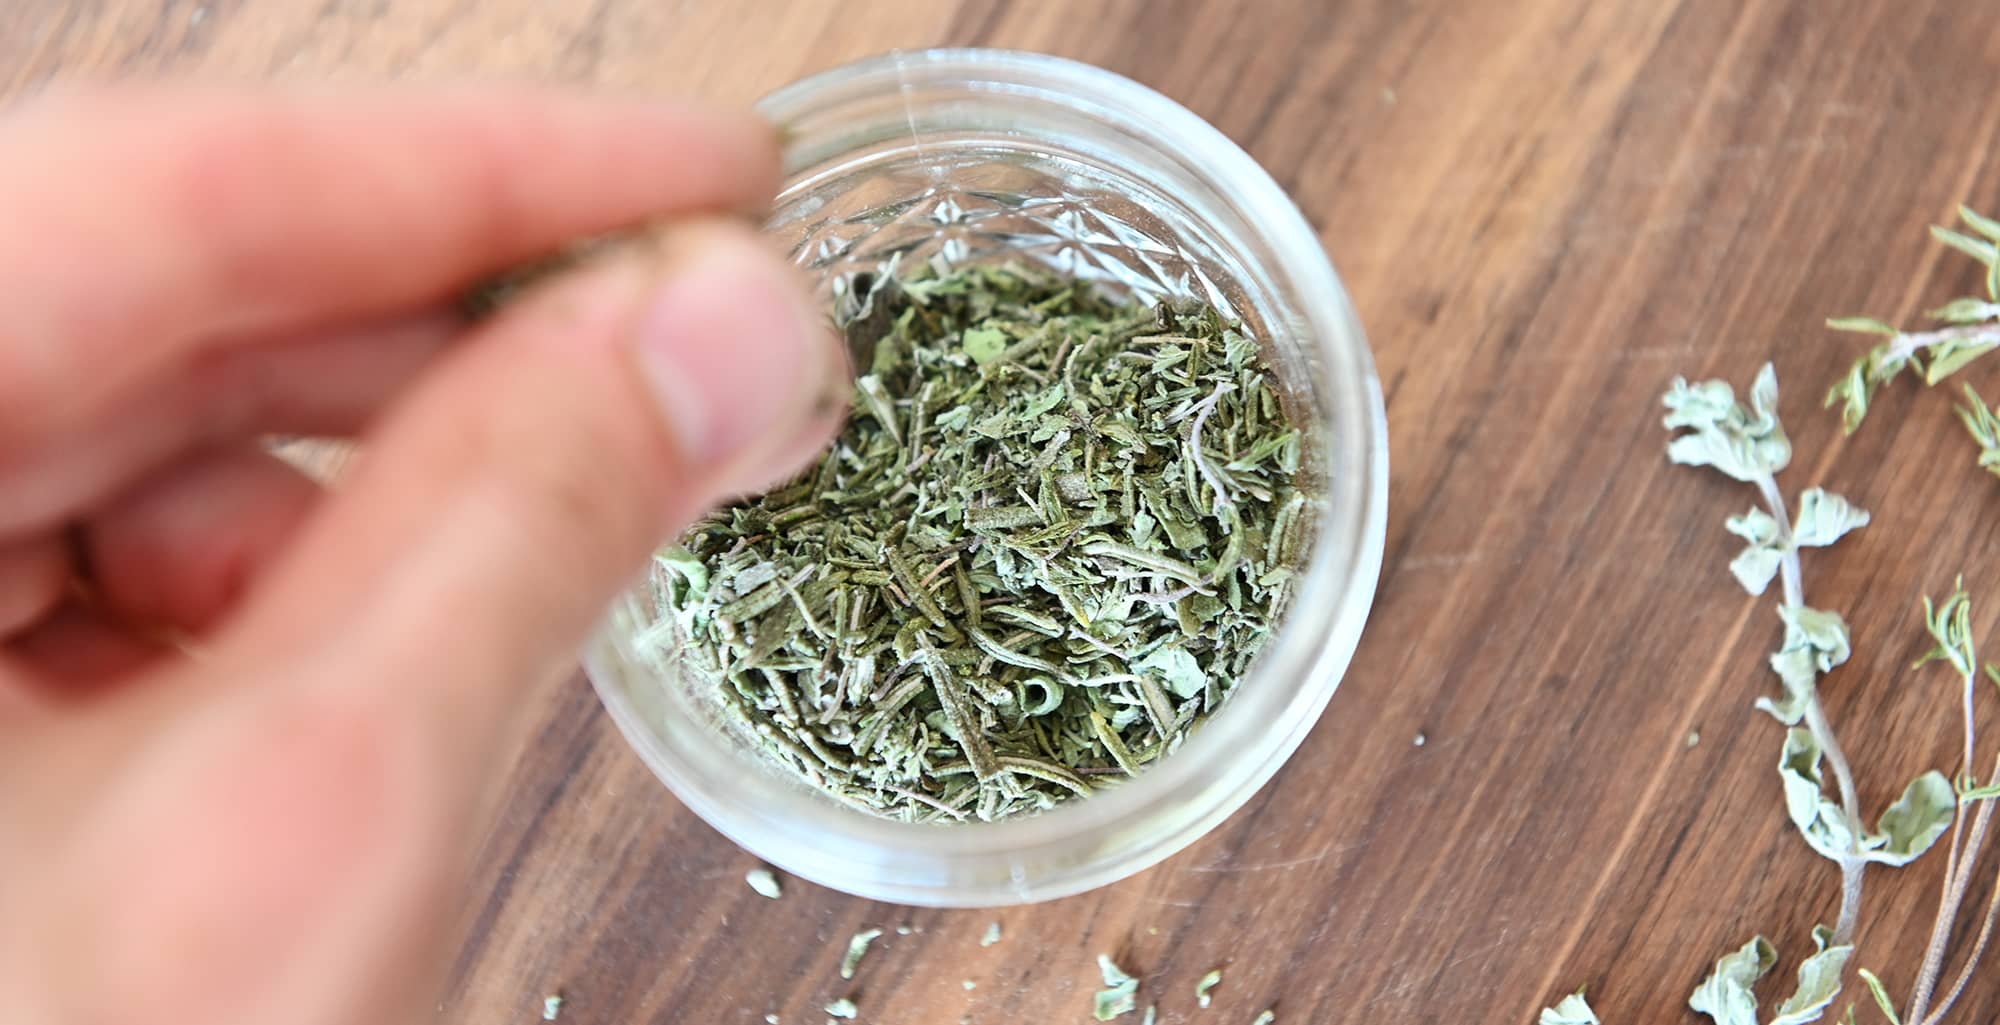 Jar of Italian herb blend next to dehydrated oregano, rosemary, and thyme